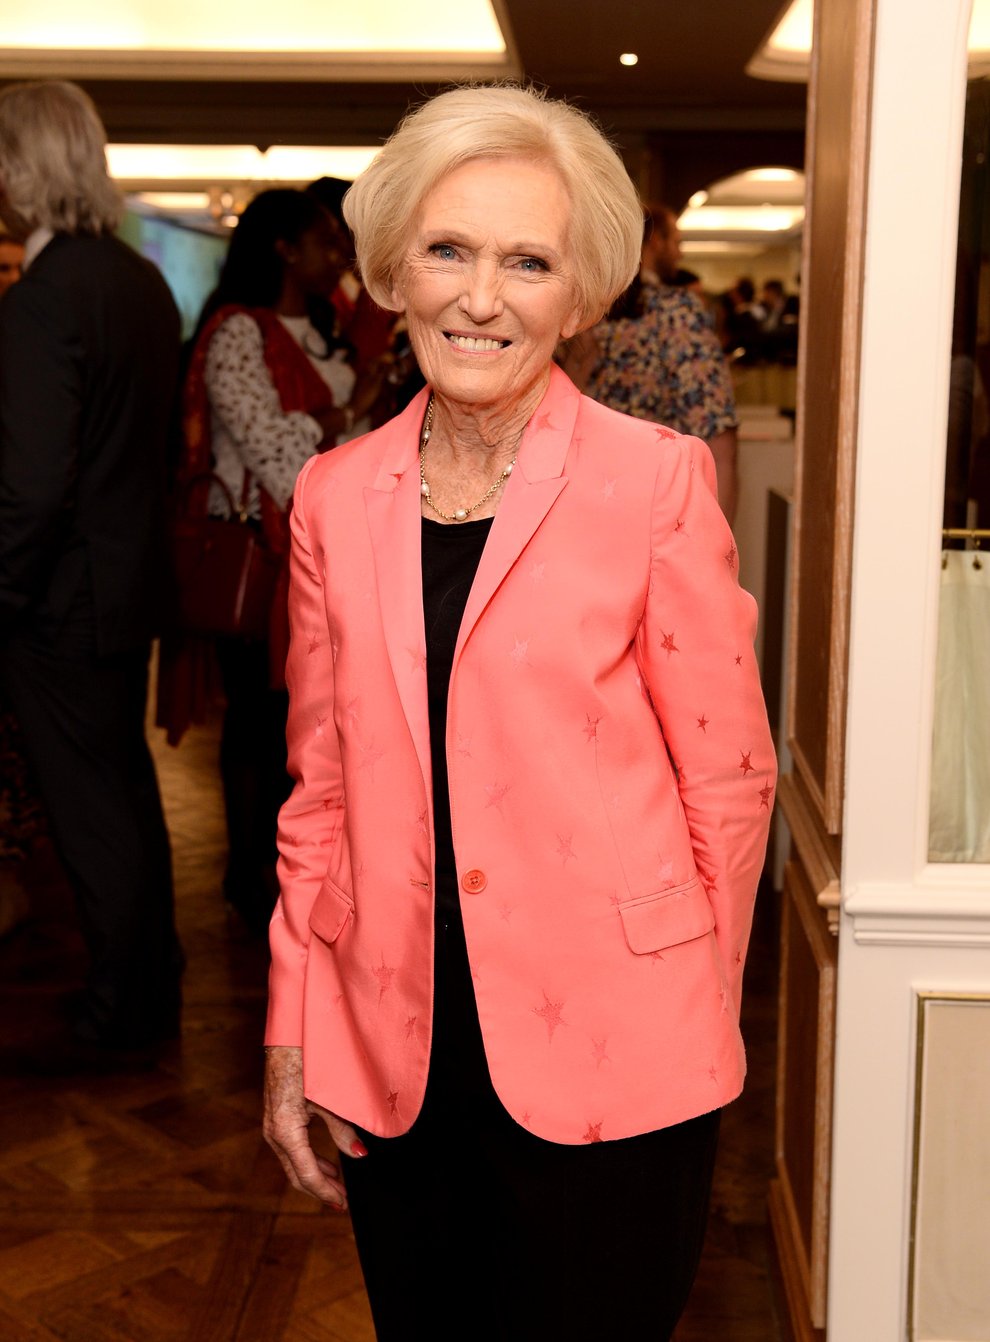 Mary Berry is to become a dame, reports a Sunday newspaper